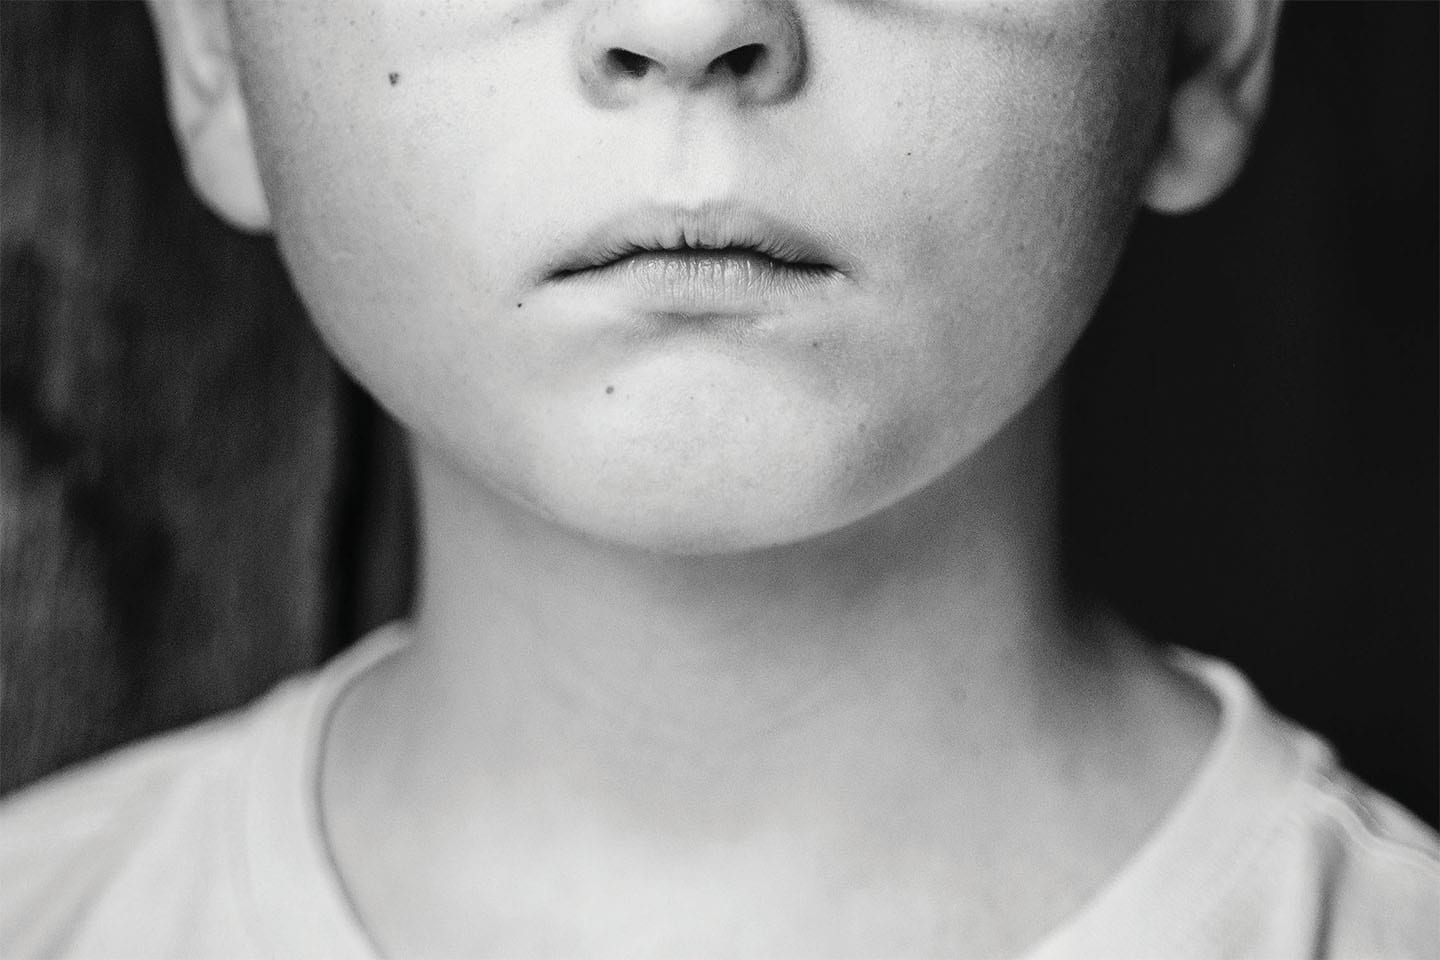 lower half of serious child's face in black and white in chattanooga